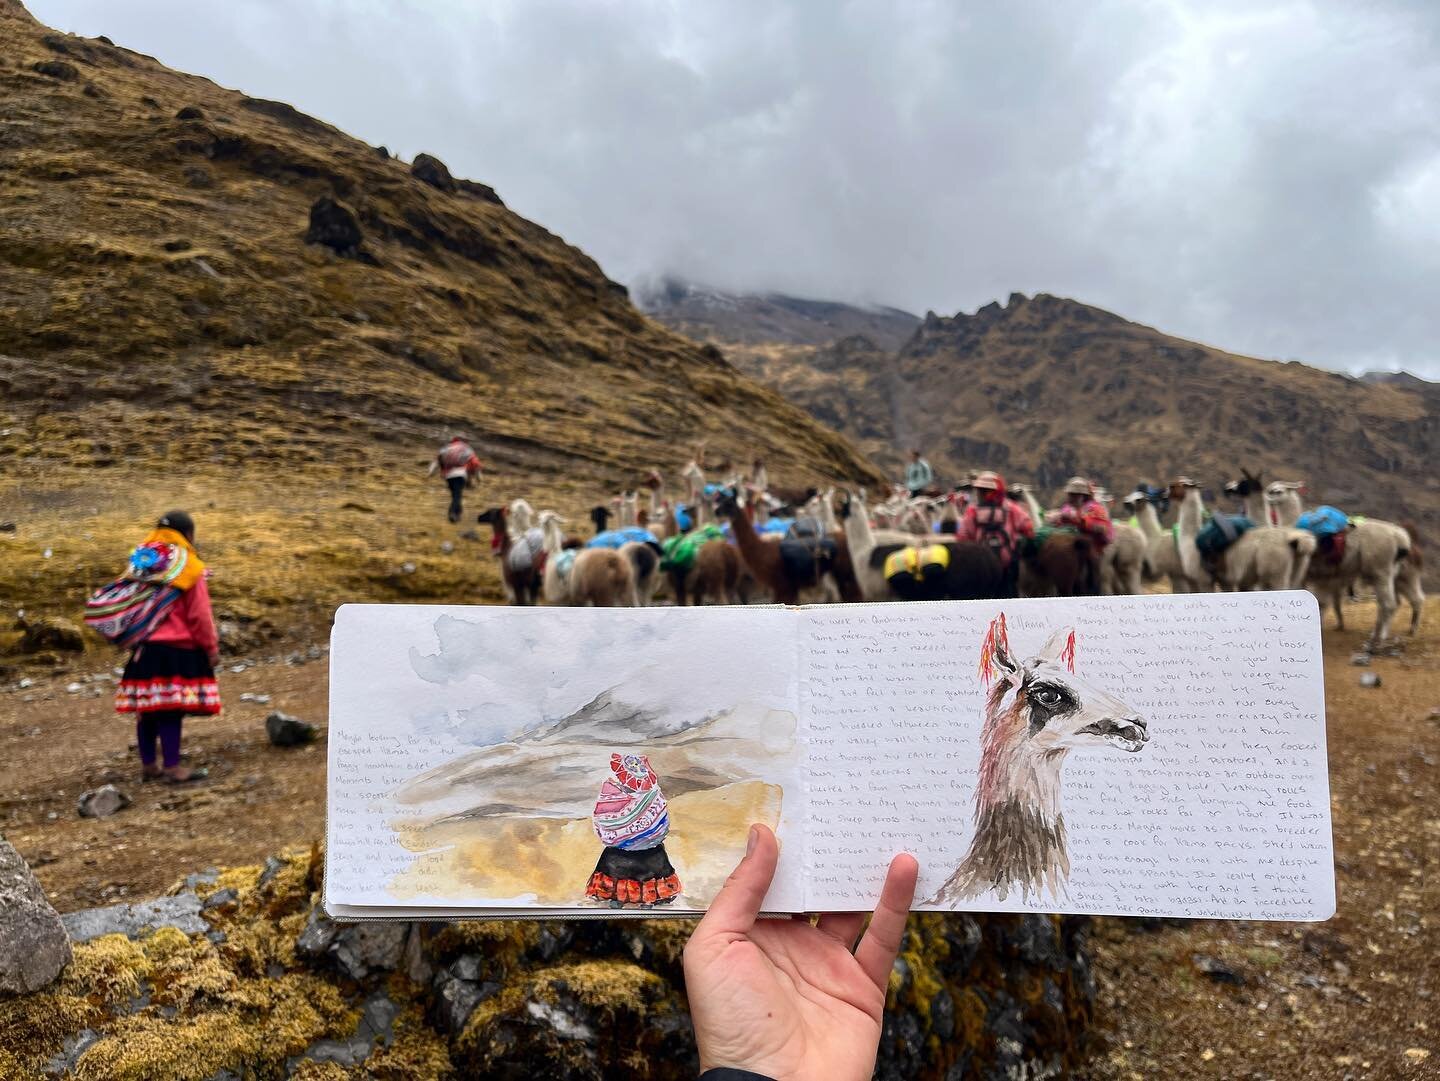 Sketches from a few weeks ago with @llamapackproject and @arccgap in the Urubamba mountains! 

The Llama Pack Project uses llamas, rather than mules, as trekking pack animals in the Peruvian Andes, specifically the Urubamba mountains, which lie only 